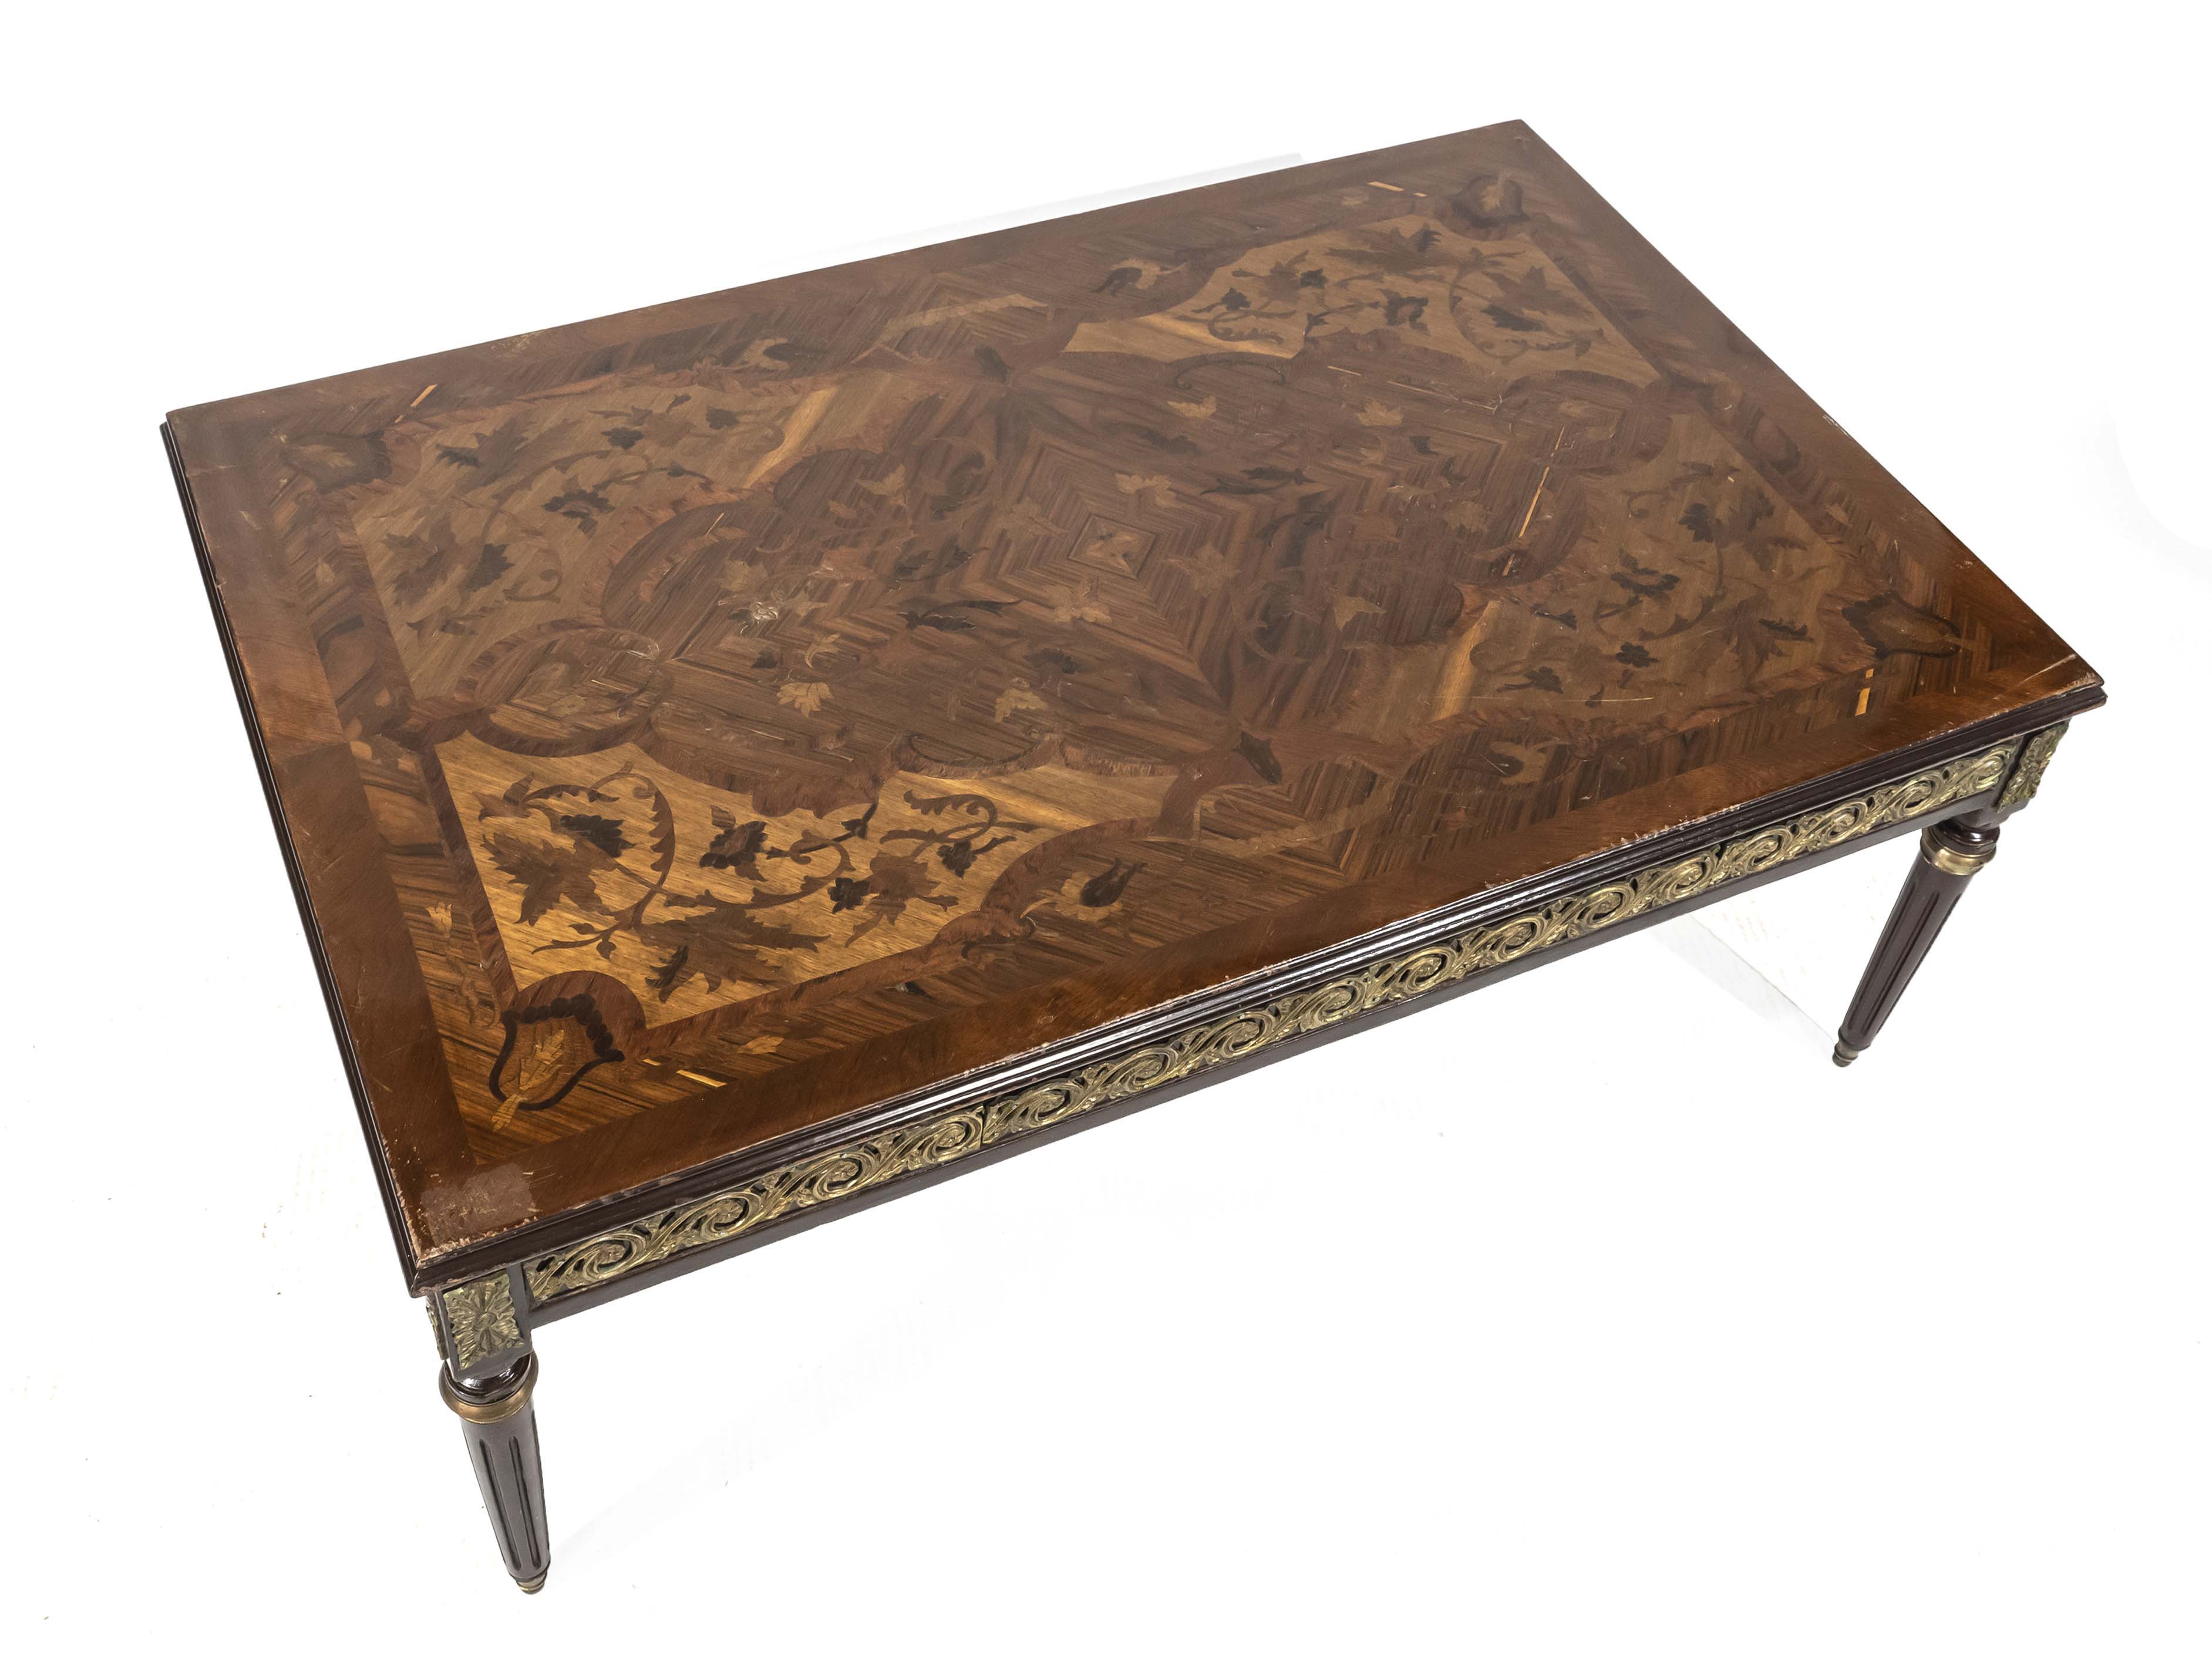 Coffee table in Louis-Seize style, late 20th century, mahogany veneered and inlaid with other - Image 2 of 3